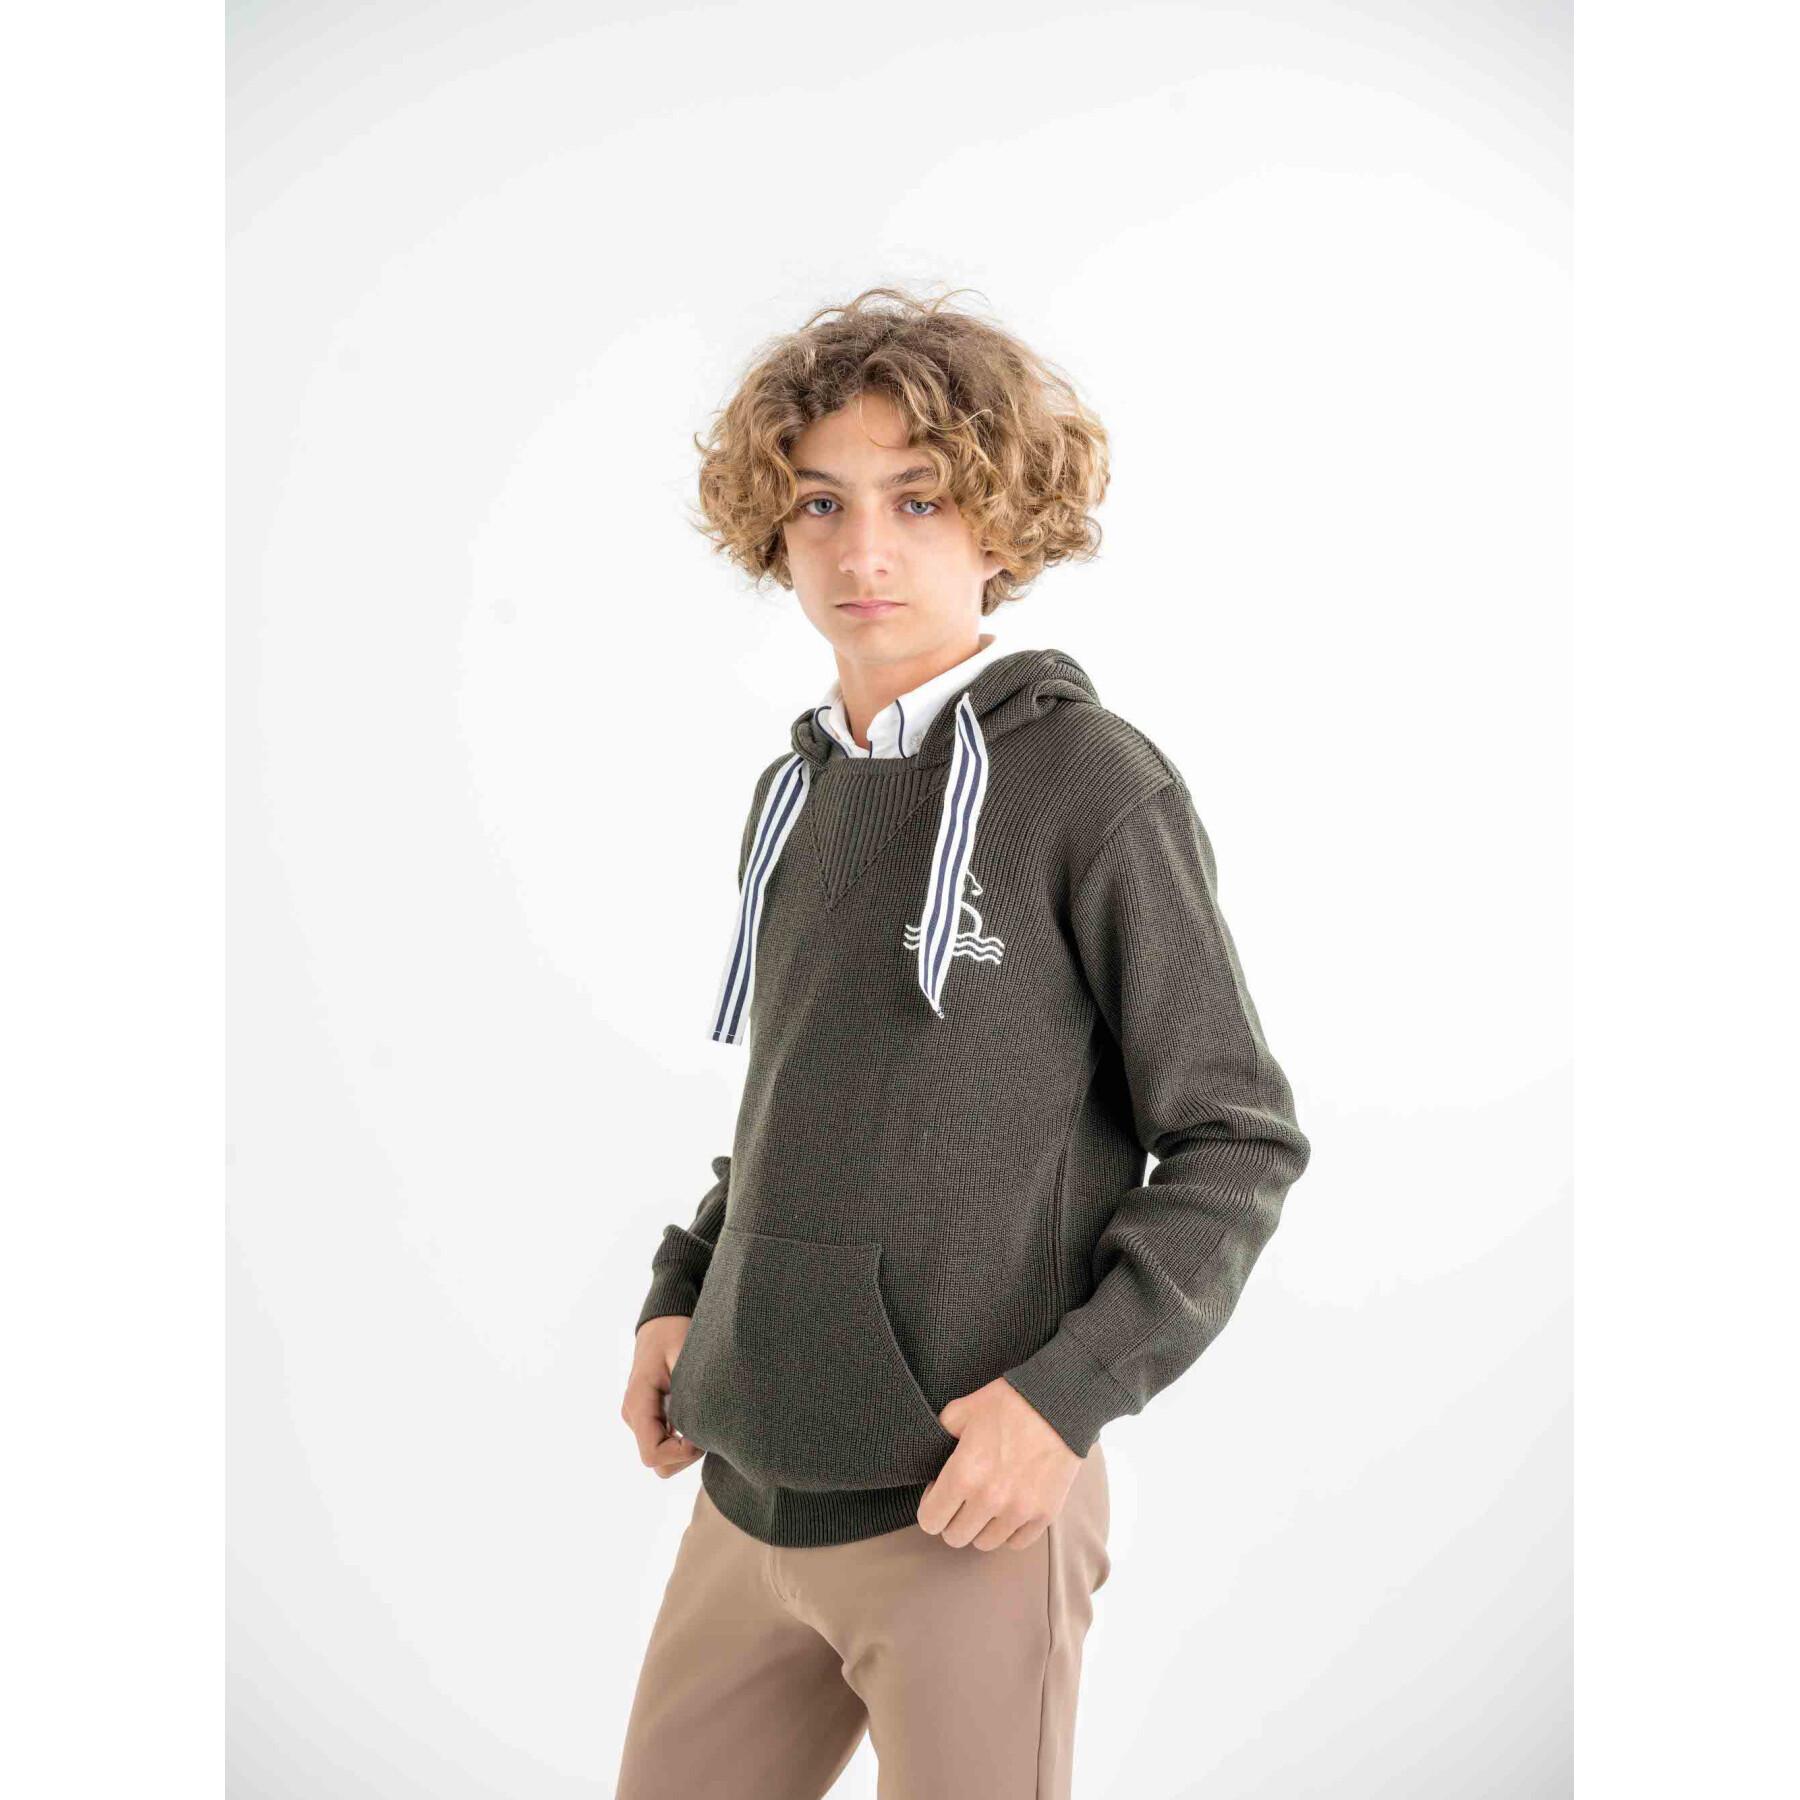 Hooded sweater Le Sabotier Rescue